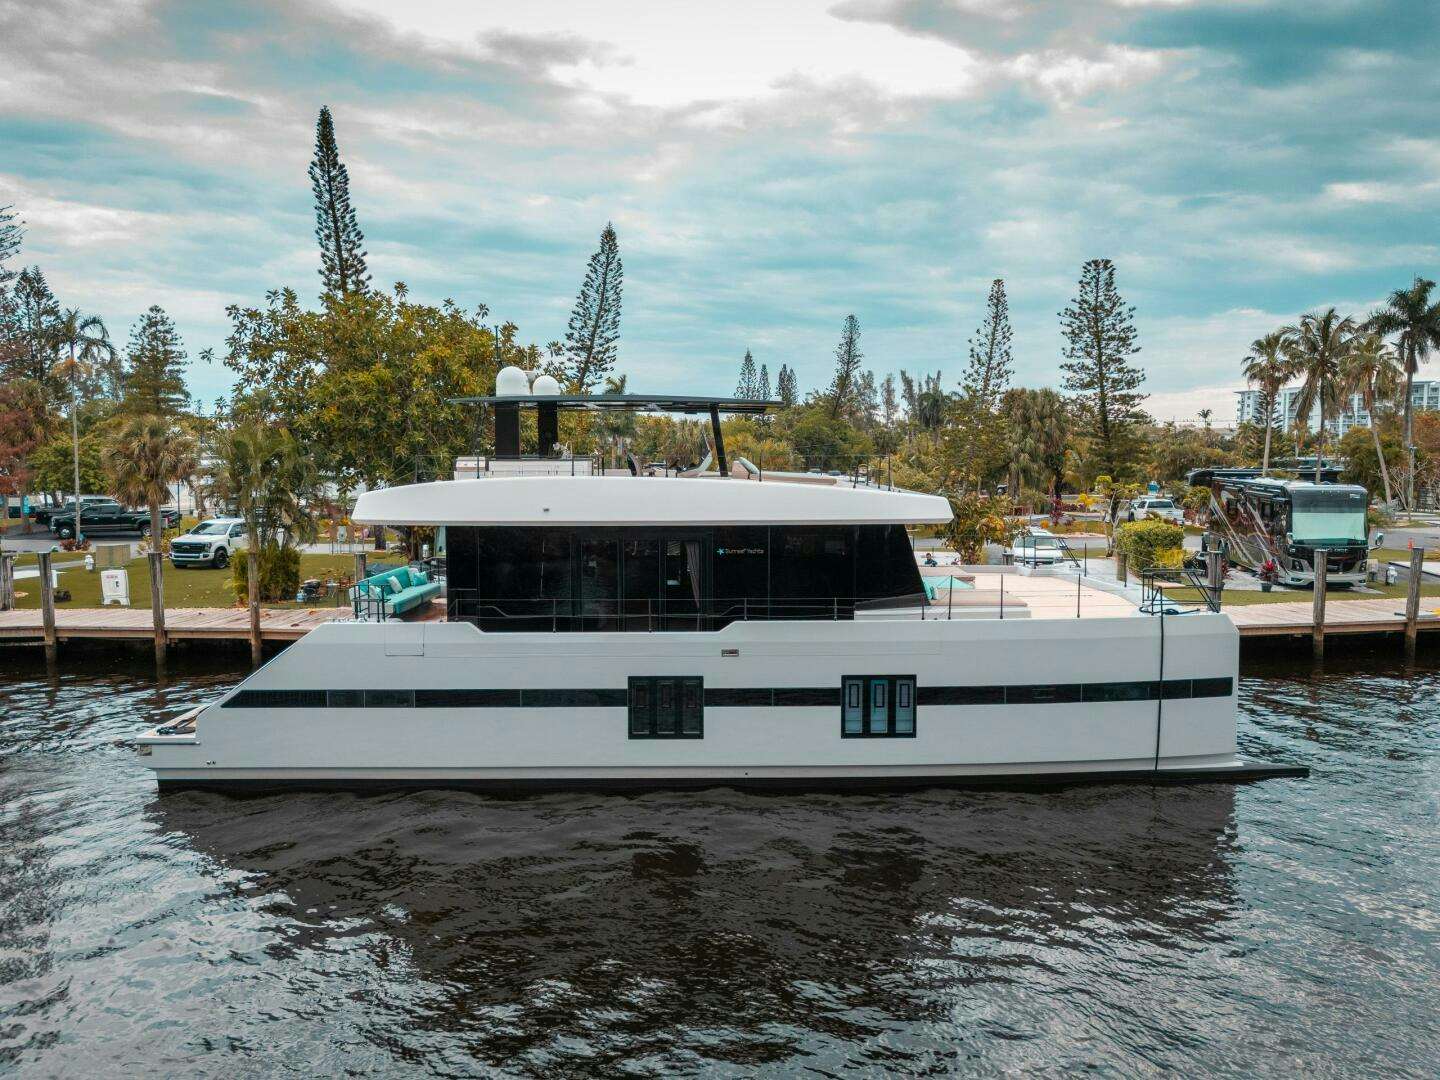 Second chance
Yacht for Sale